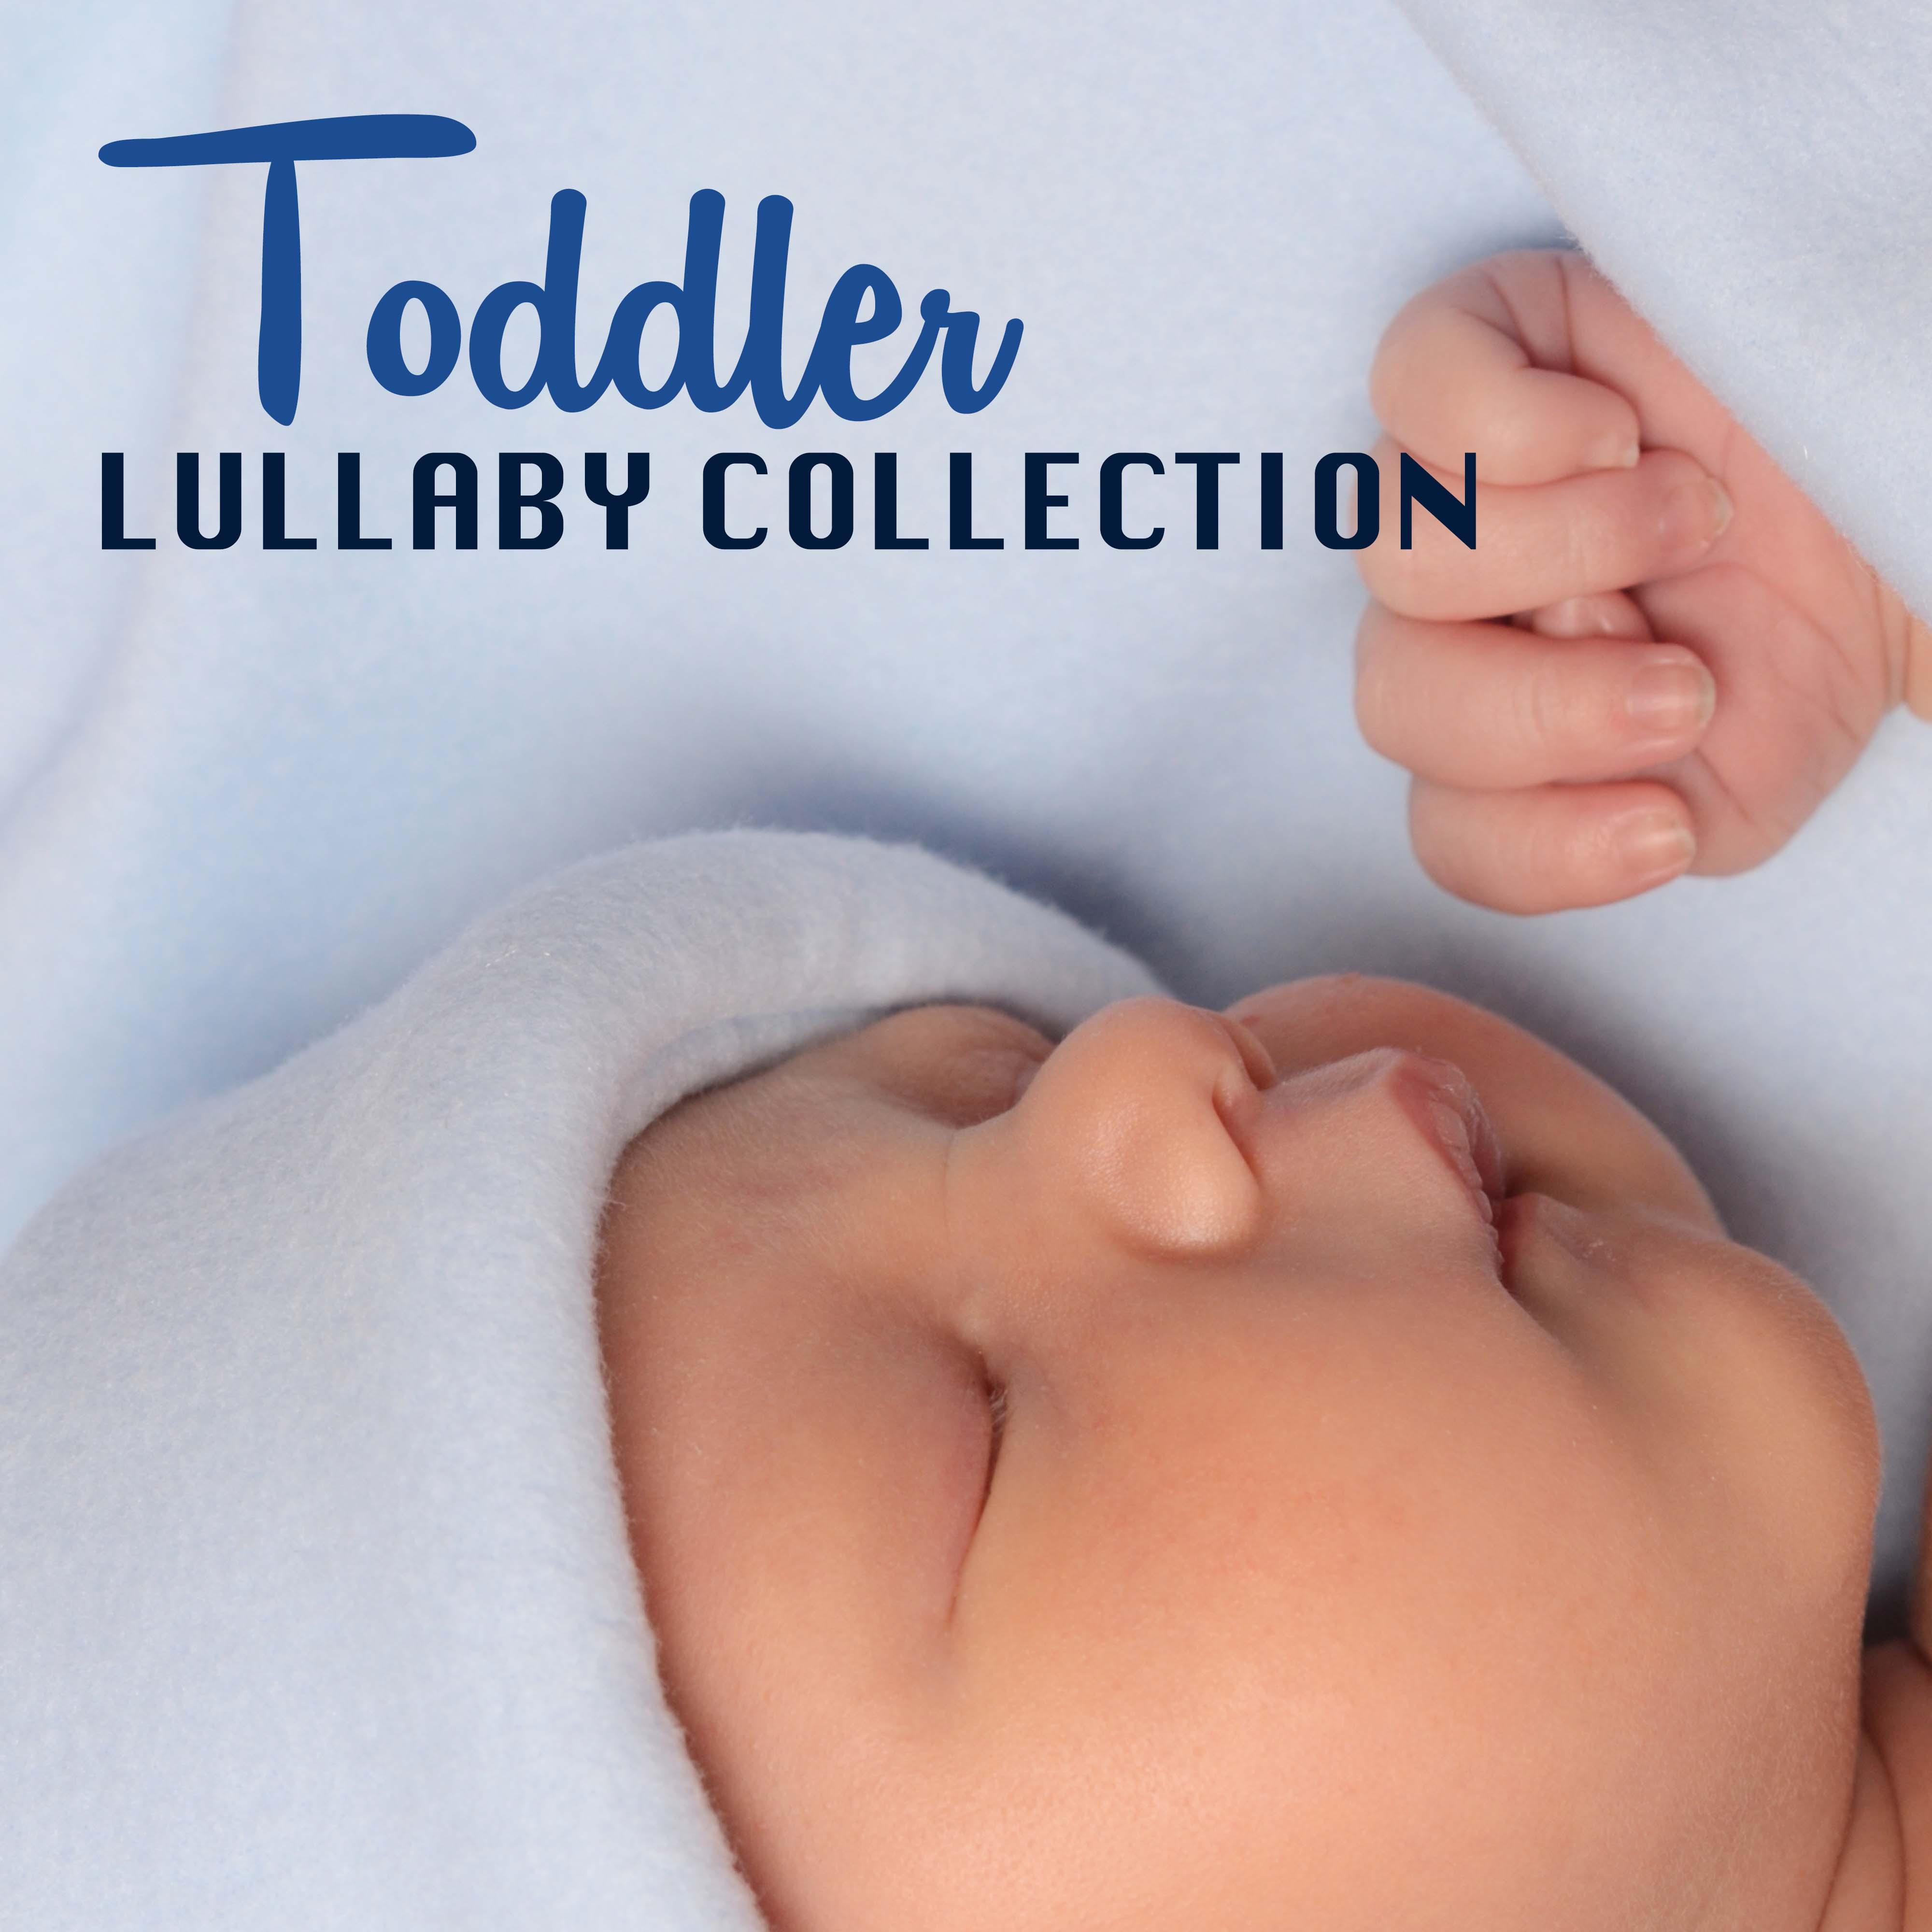 Toddler Lullaby Collection - Sounds of Nature